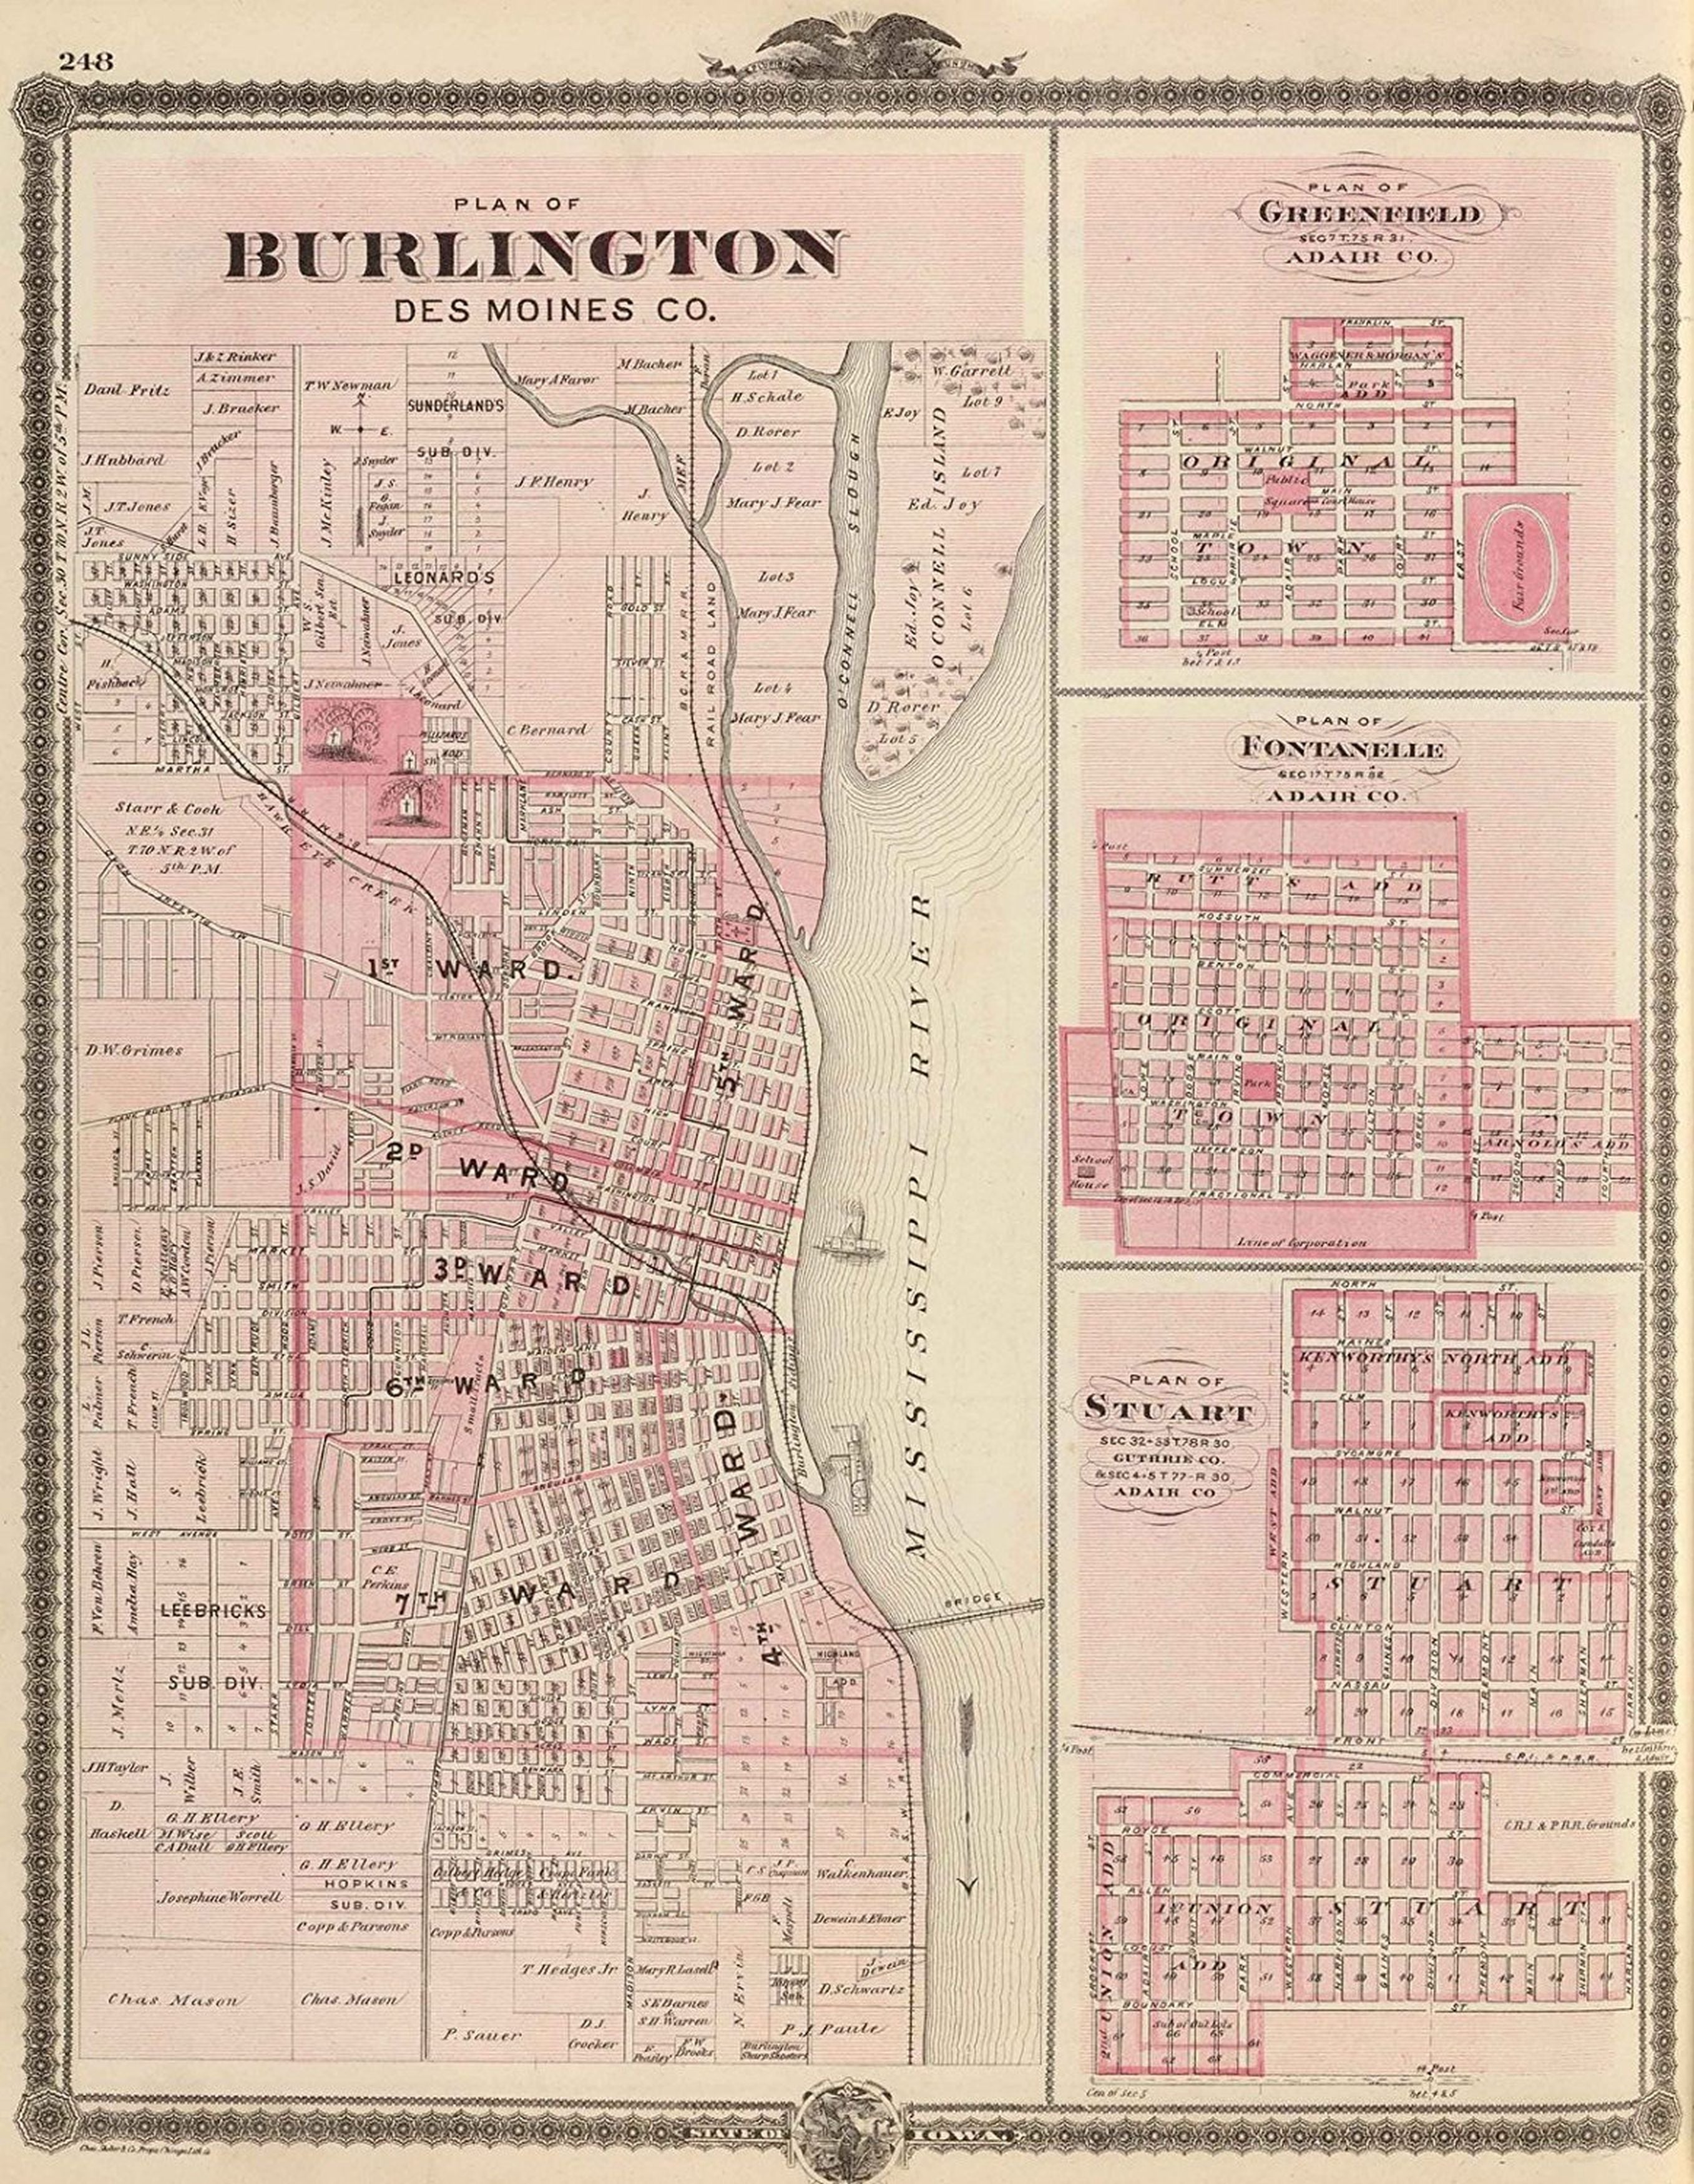 Plan of Burlington, Des Moines Co. (with) Plan of Greenfield... Adair Co. (with) Plan of Fontanelle... Adair Co. (with) Plan of Stuart... Guthrie Co.... Adair Co., State of Iowa. Chas. Shober and Co., props., Chicago Lith. Co. (Published by the Andreas A